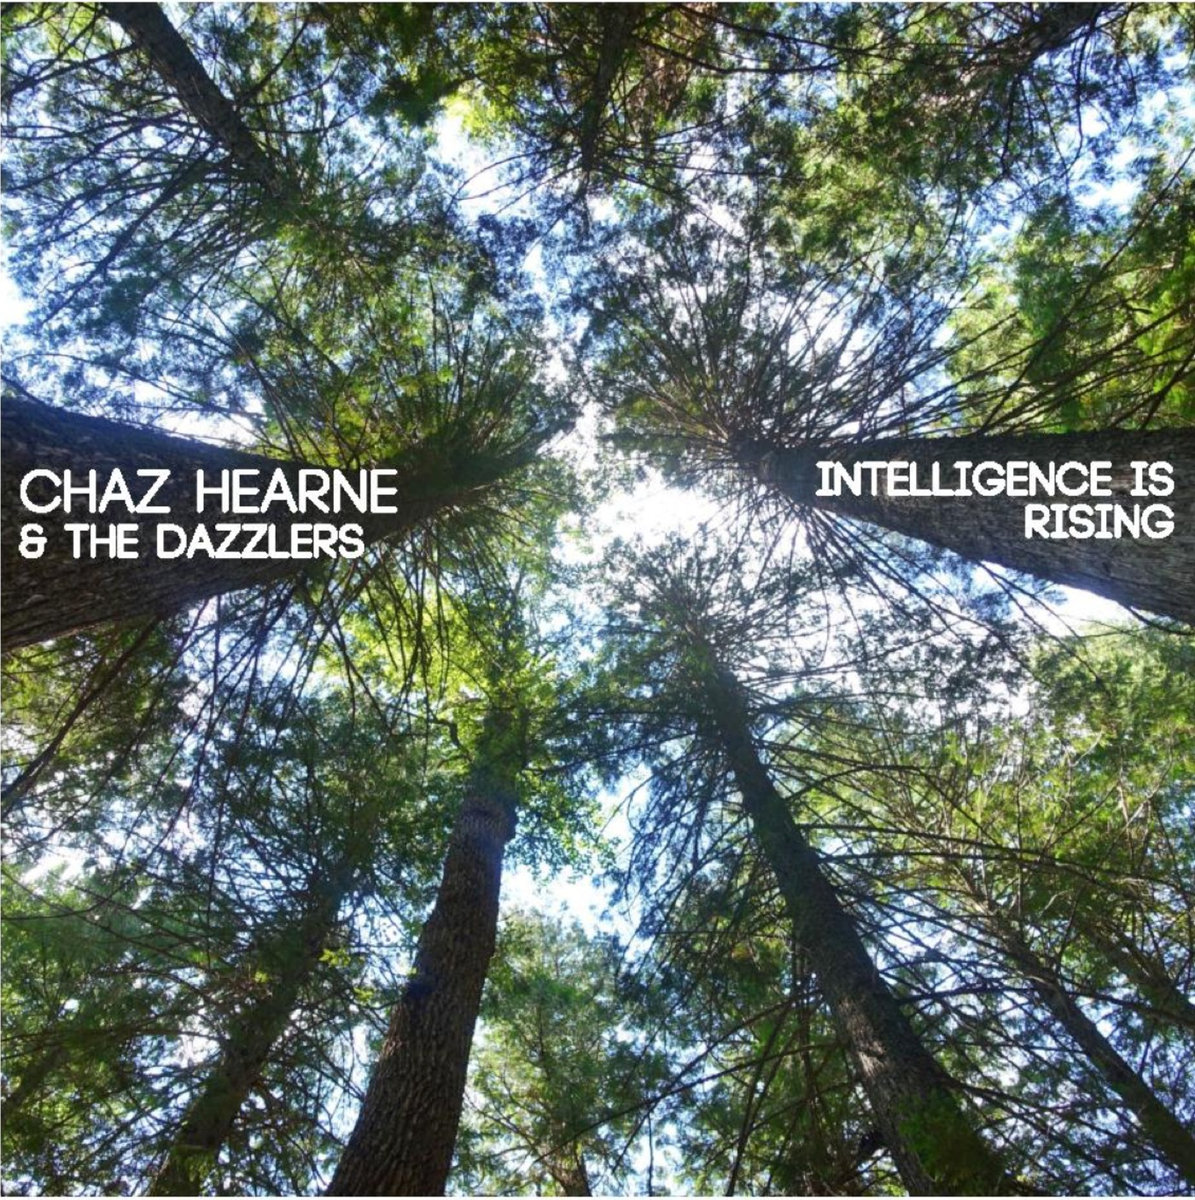 Chaz Hearne & the Dazzlers – Intelligence is Rising